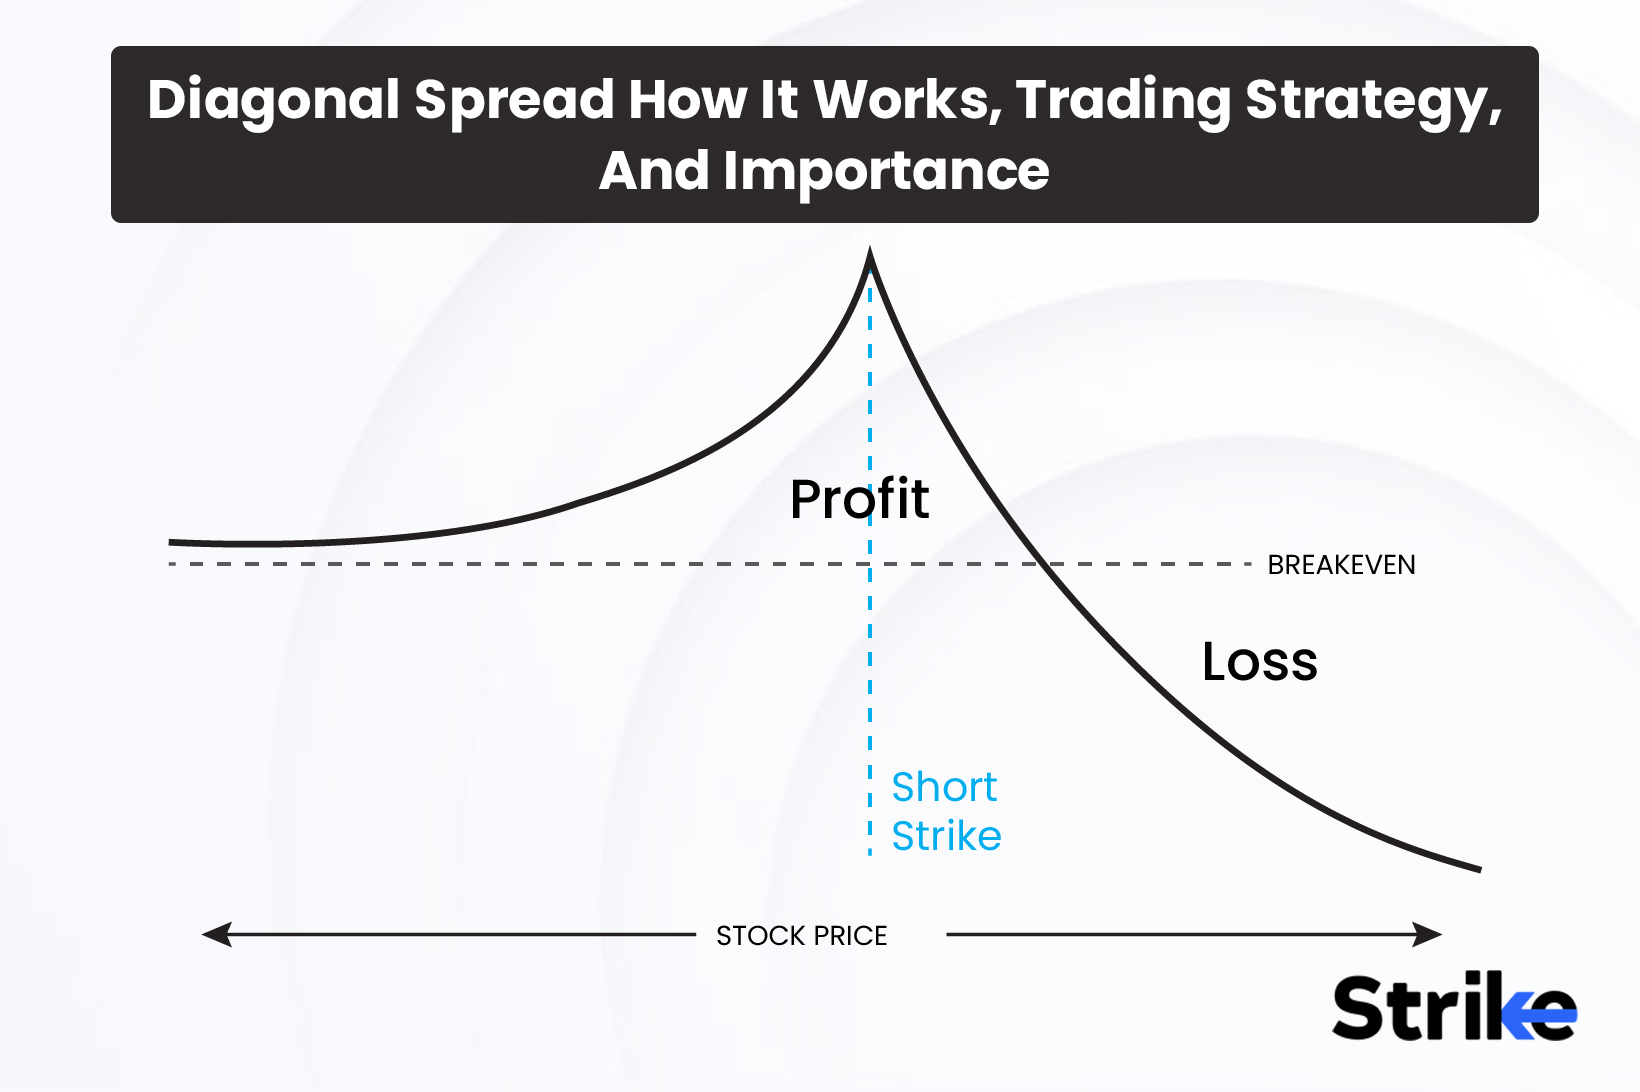 Diagonal Spread: How It Works, Trading Strategy, And Importance